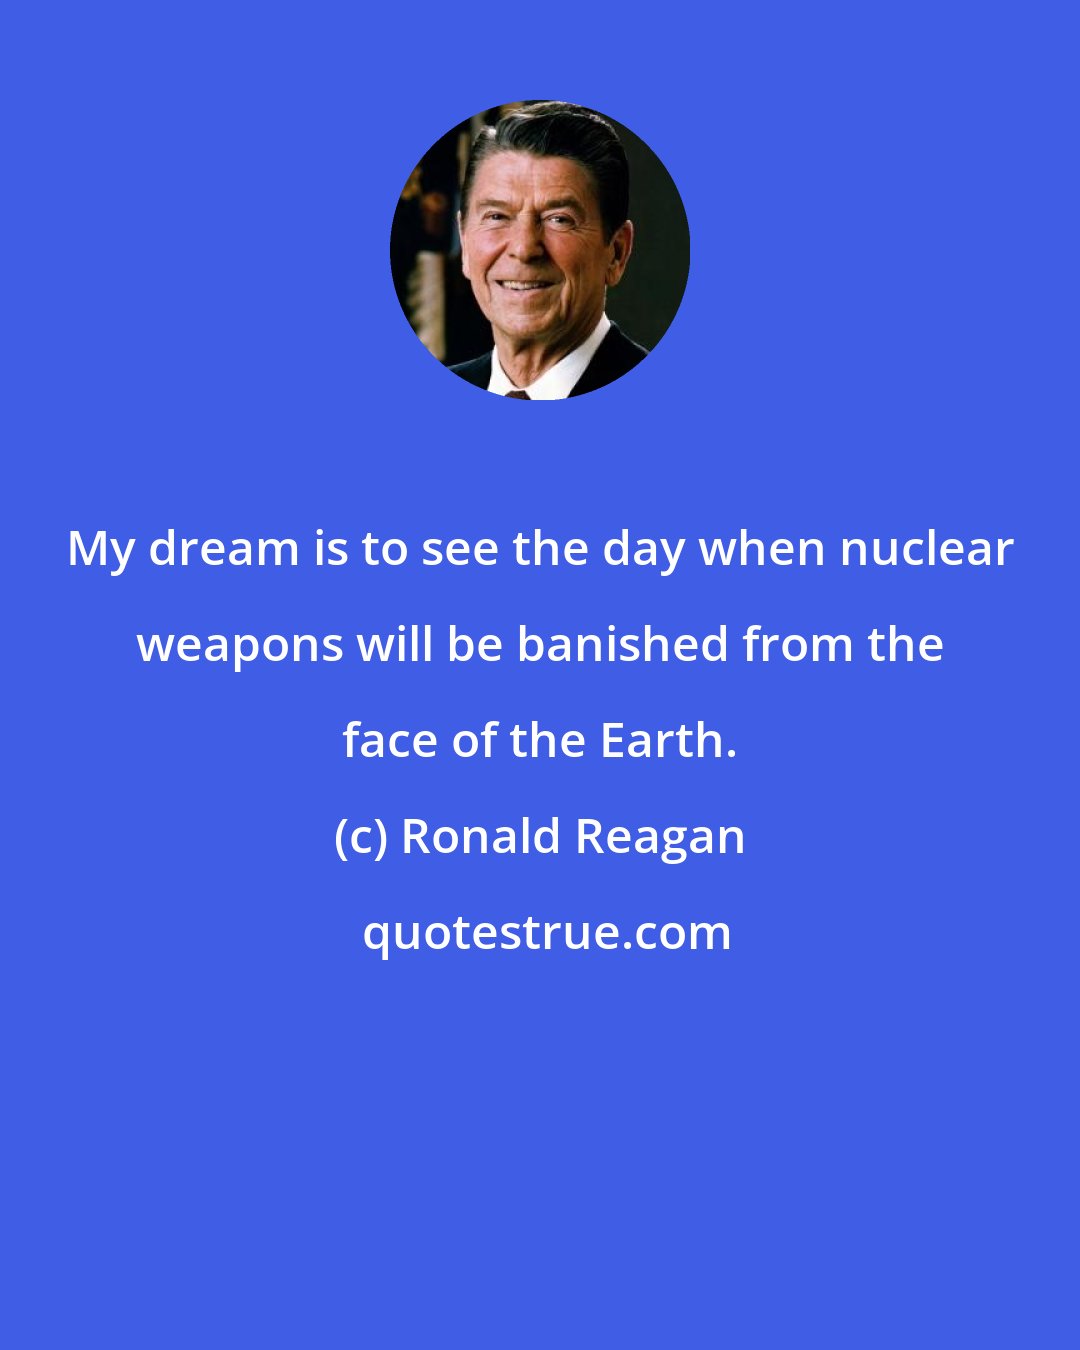 Ronald Reagan: My dream is to see the day when nuclear weapons will be banished from the face of the Earth.